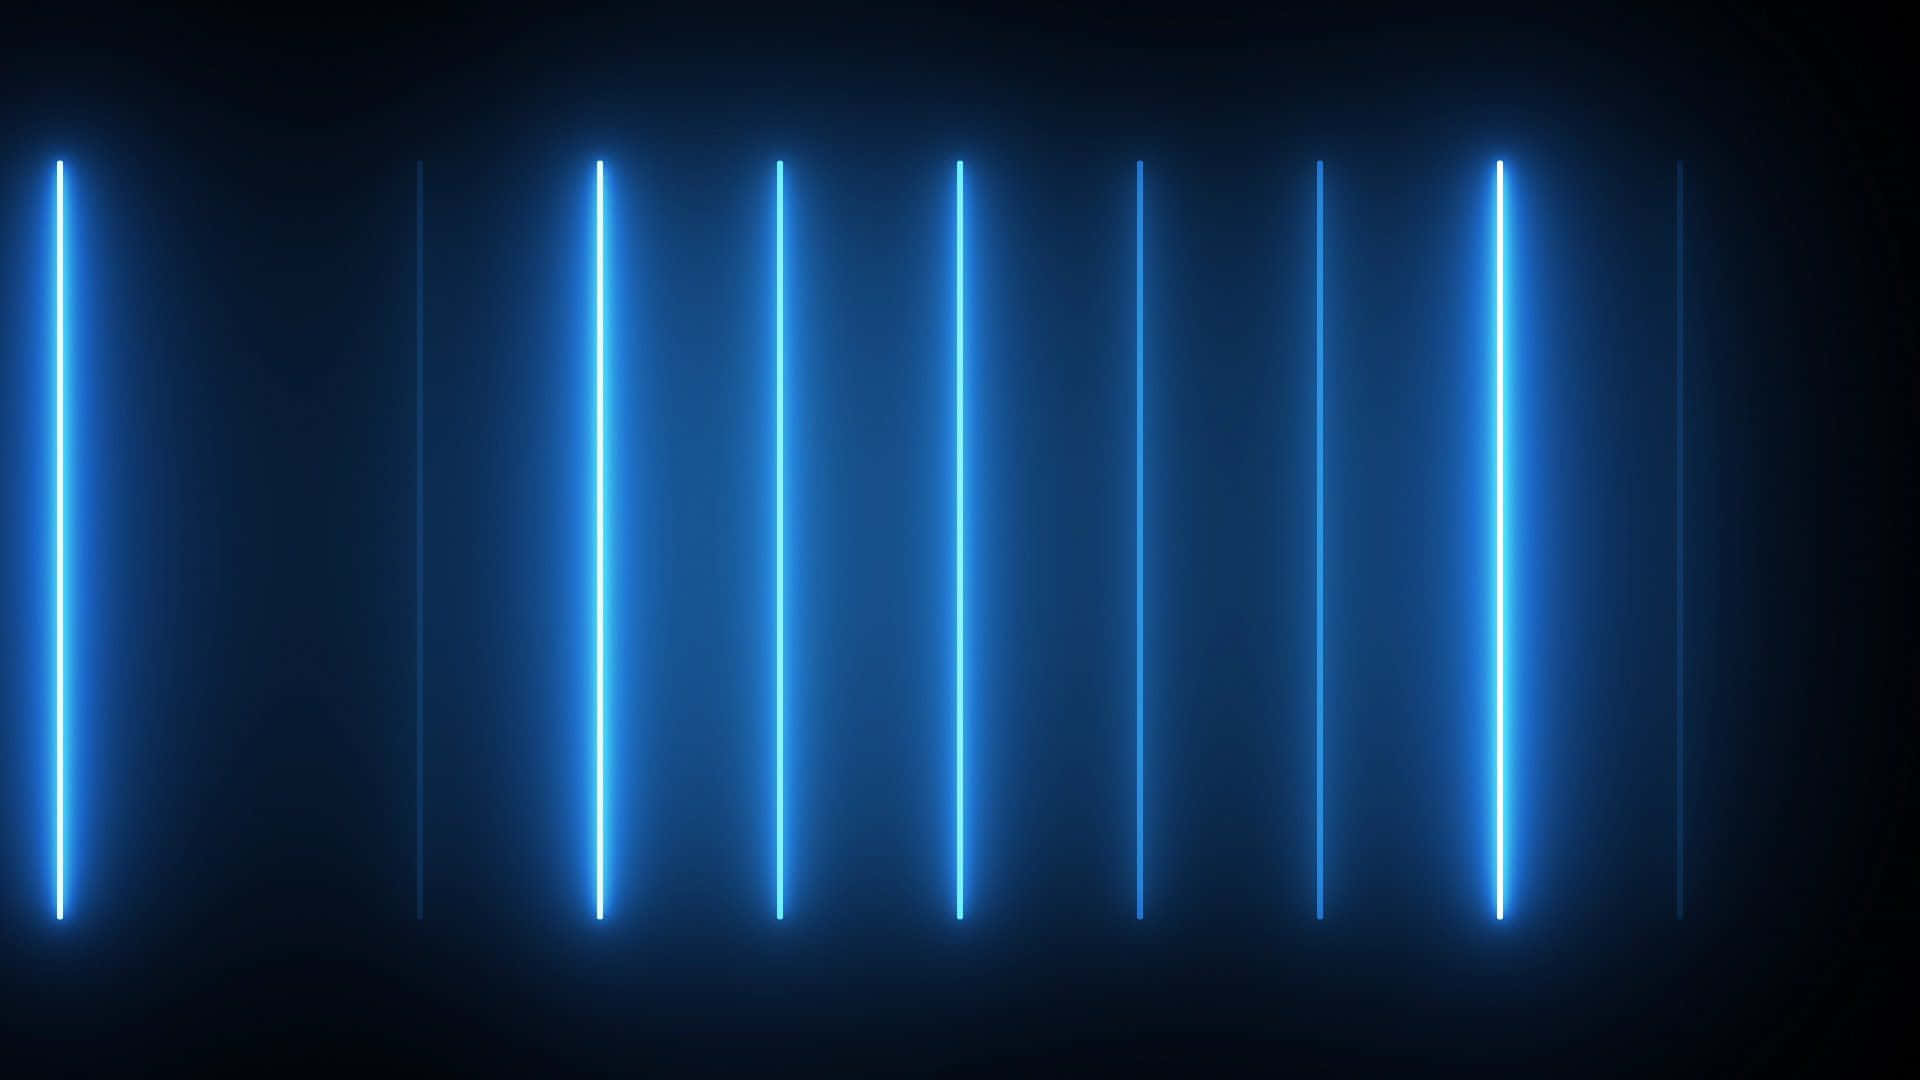 Illuminate your room with vibrancy and energy from this beautiful neon blue background